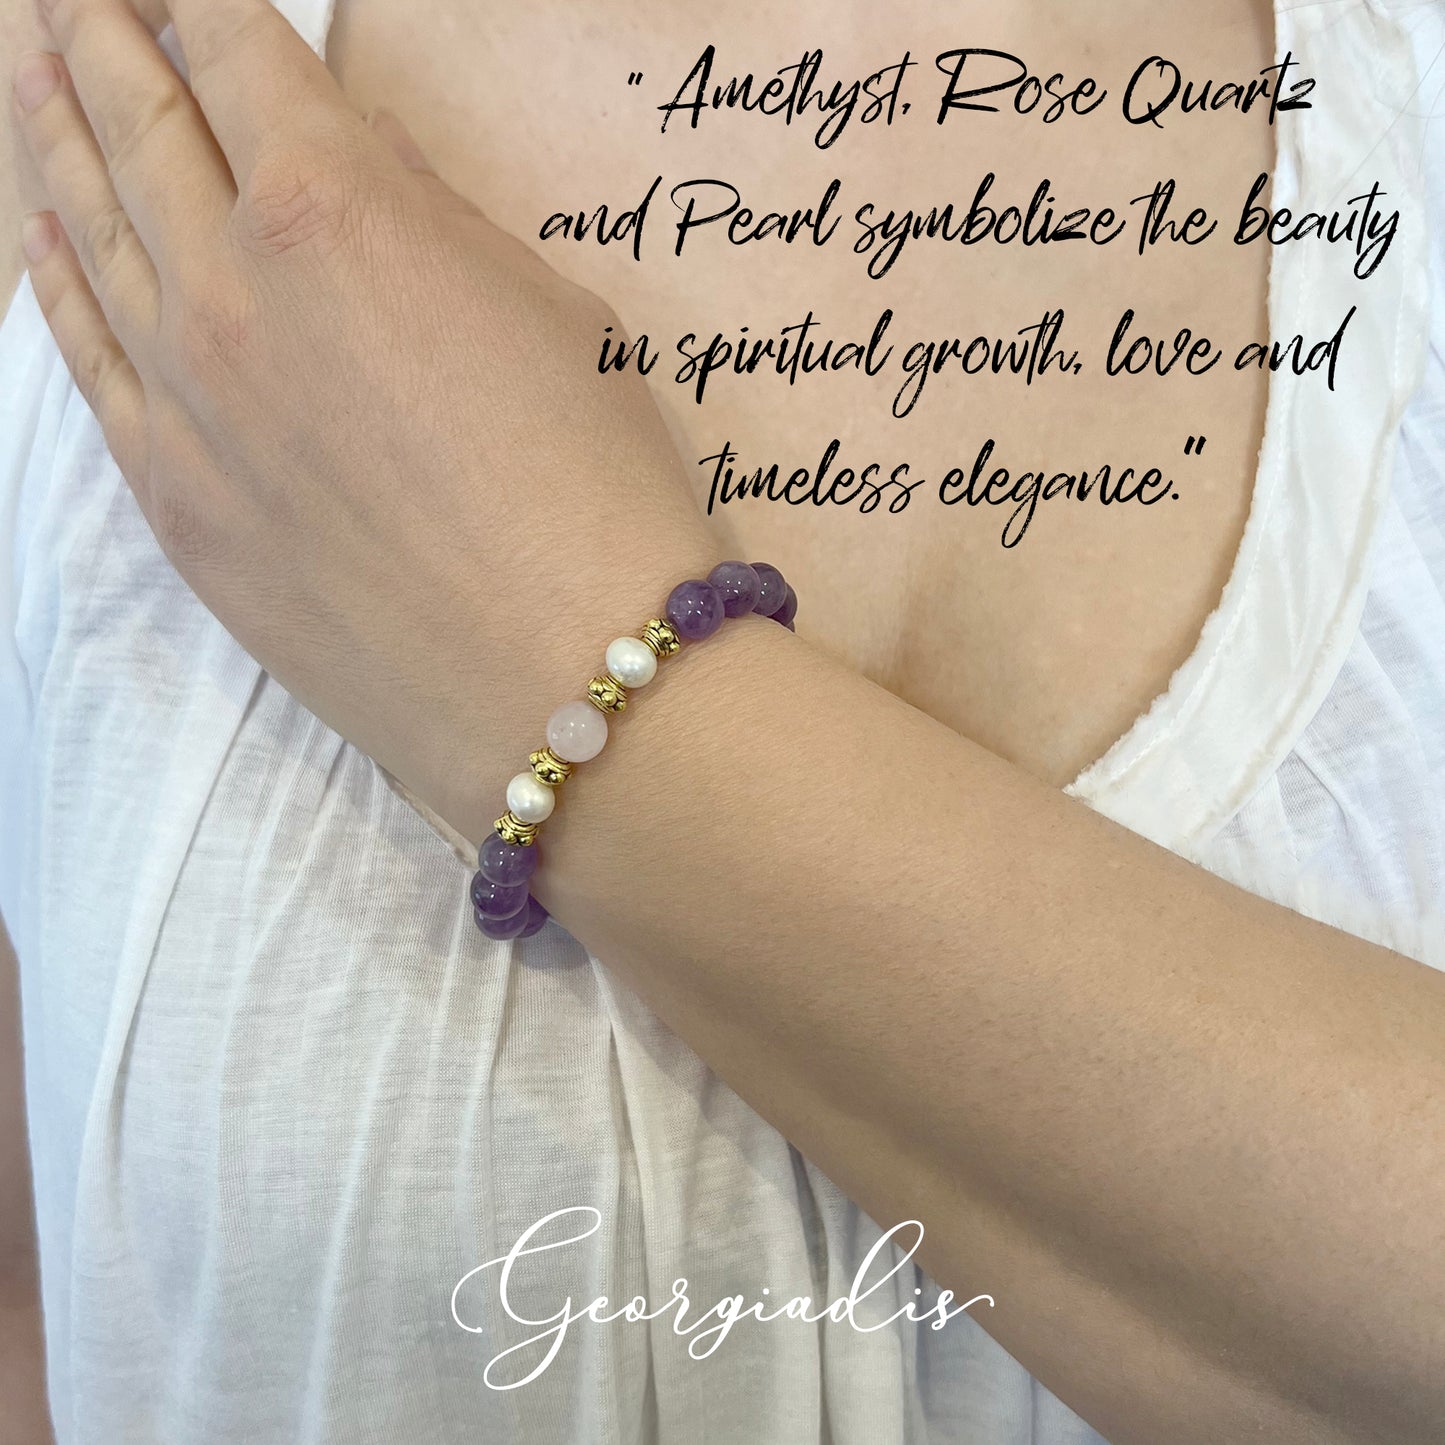 Beautiful Real Freshwater Pearls, Amethyst and Rose Quartz Bracelet, featuring Grade A, High Luster Pearls and Stunning Gemstones, Healing.